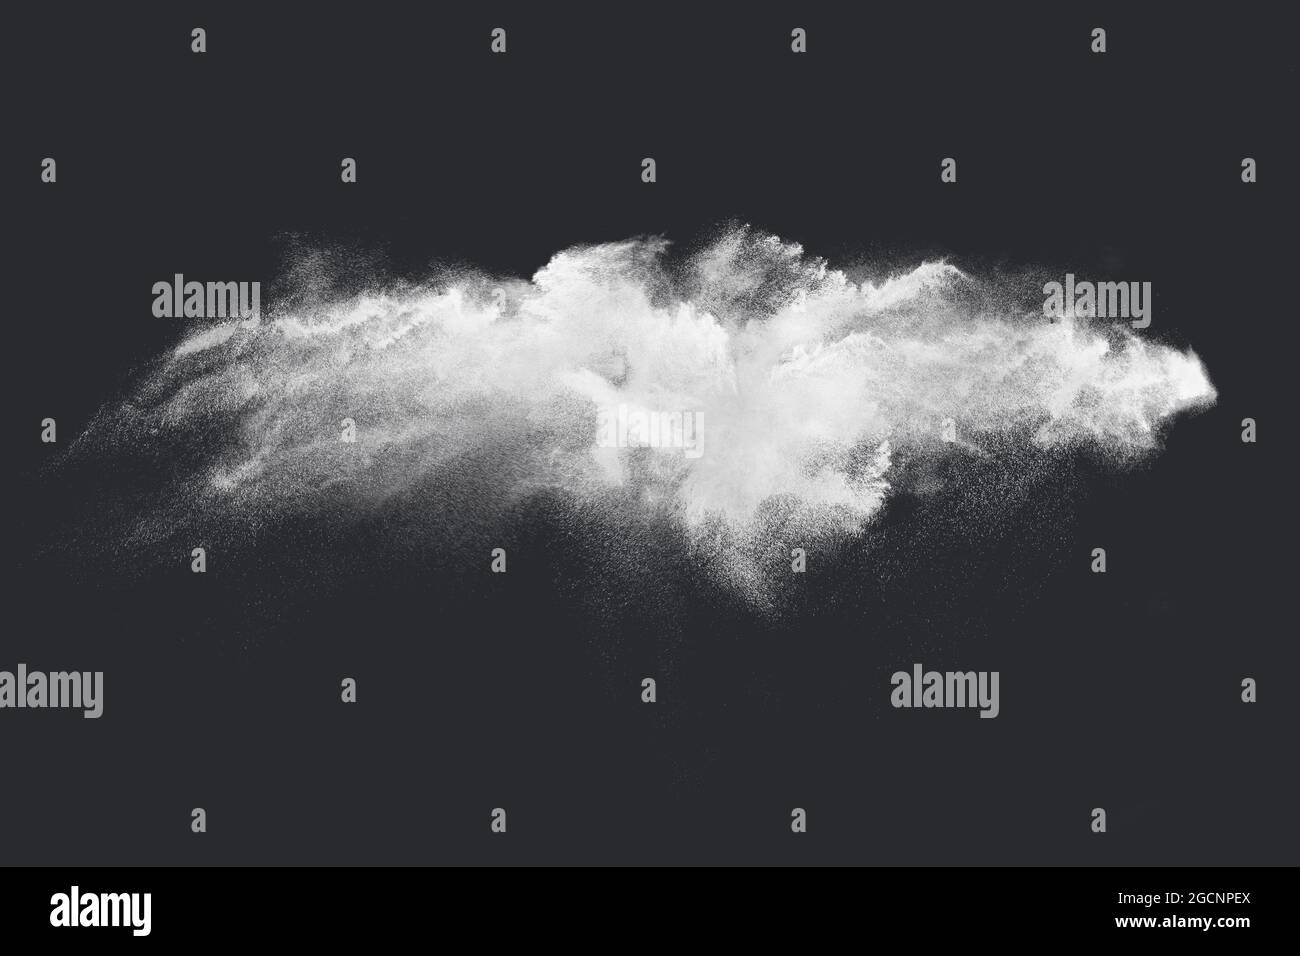 Abstract design of white powder snow cloud explosion on dark background Stock Photo